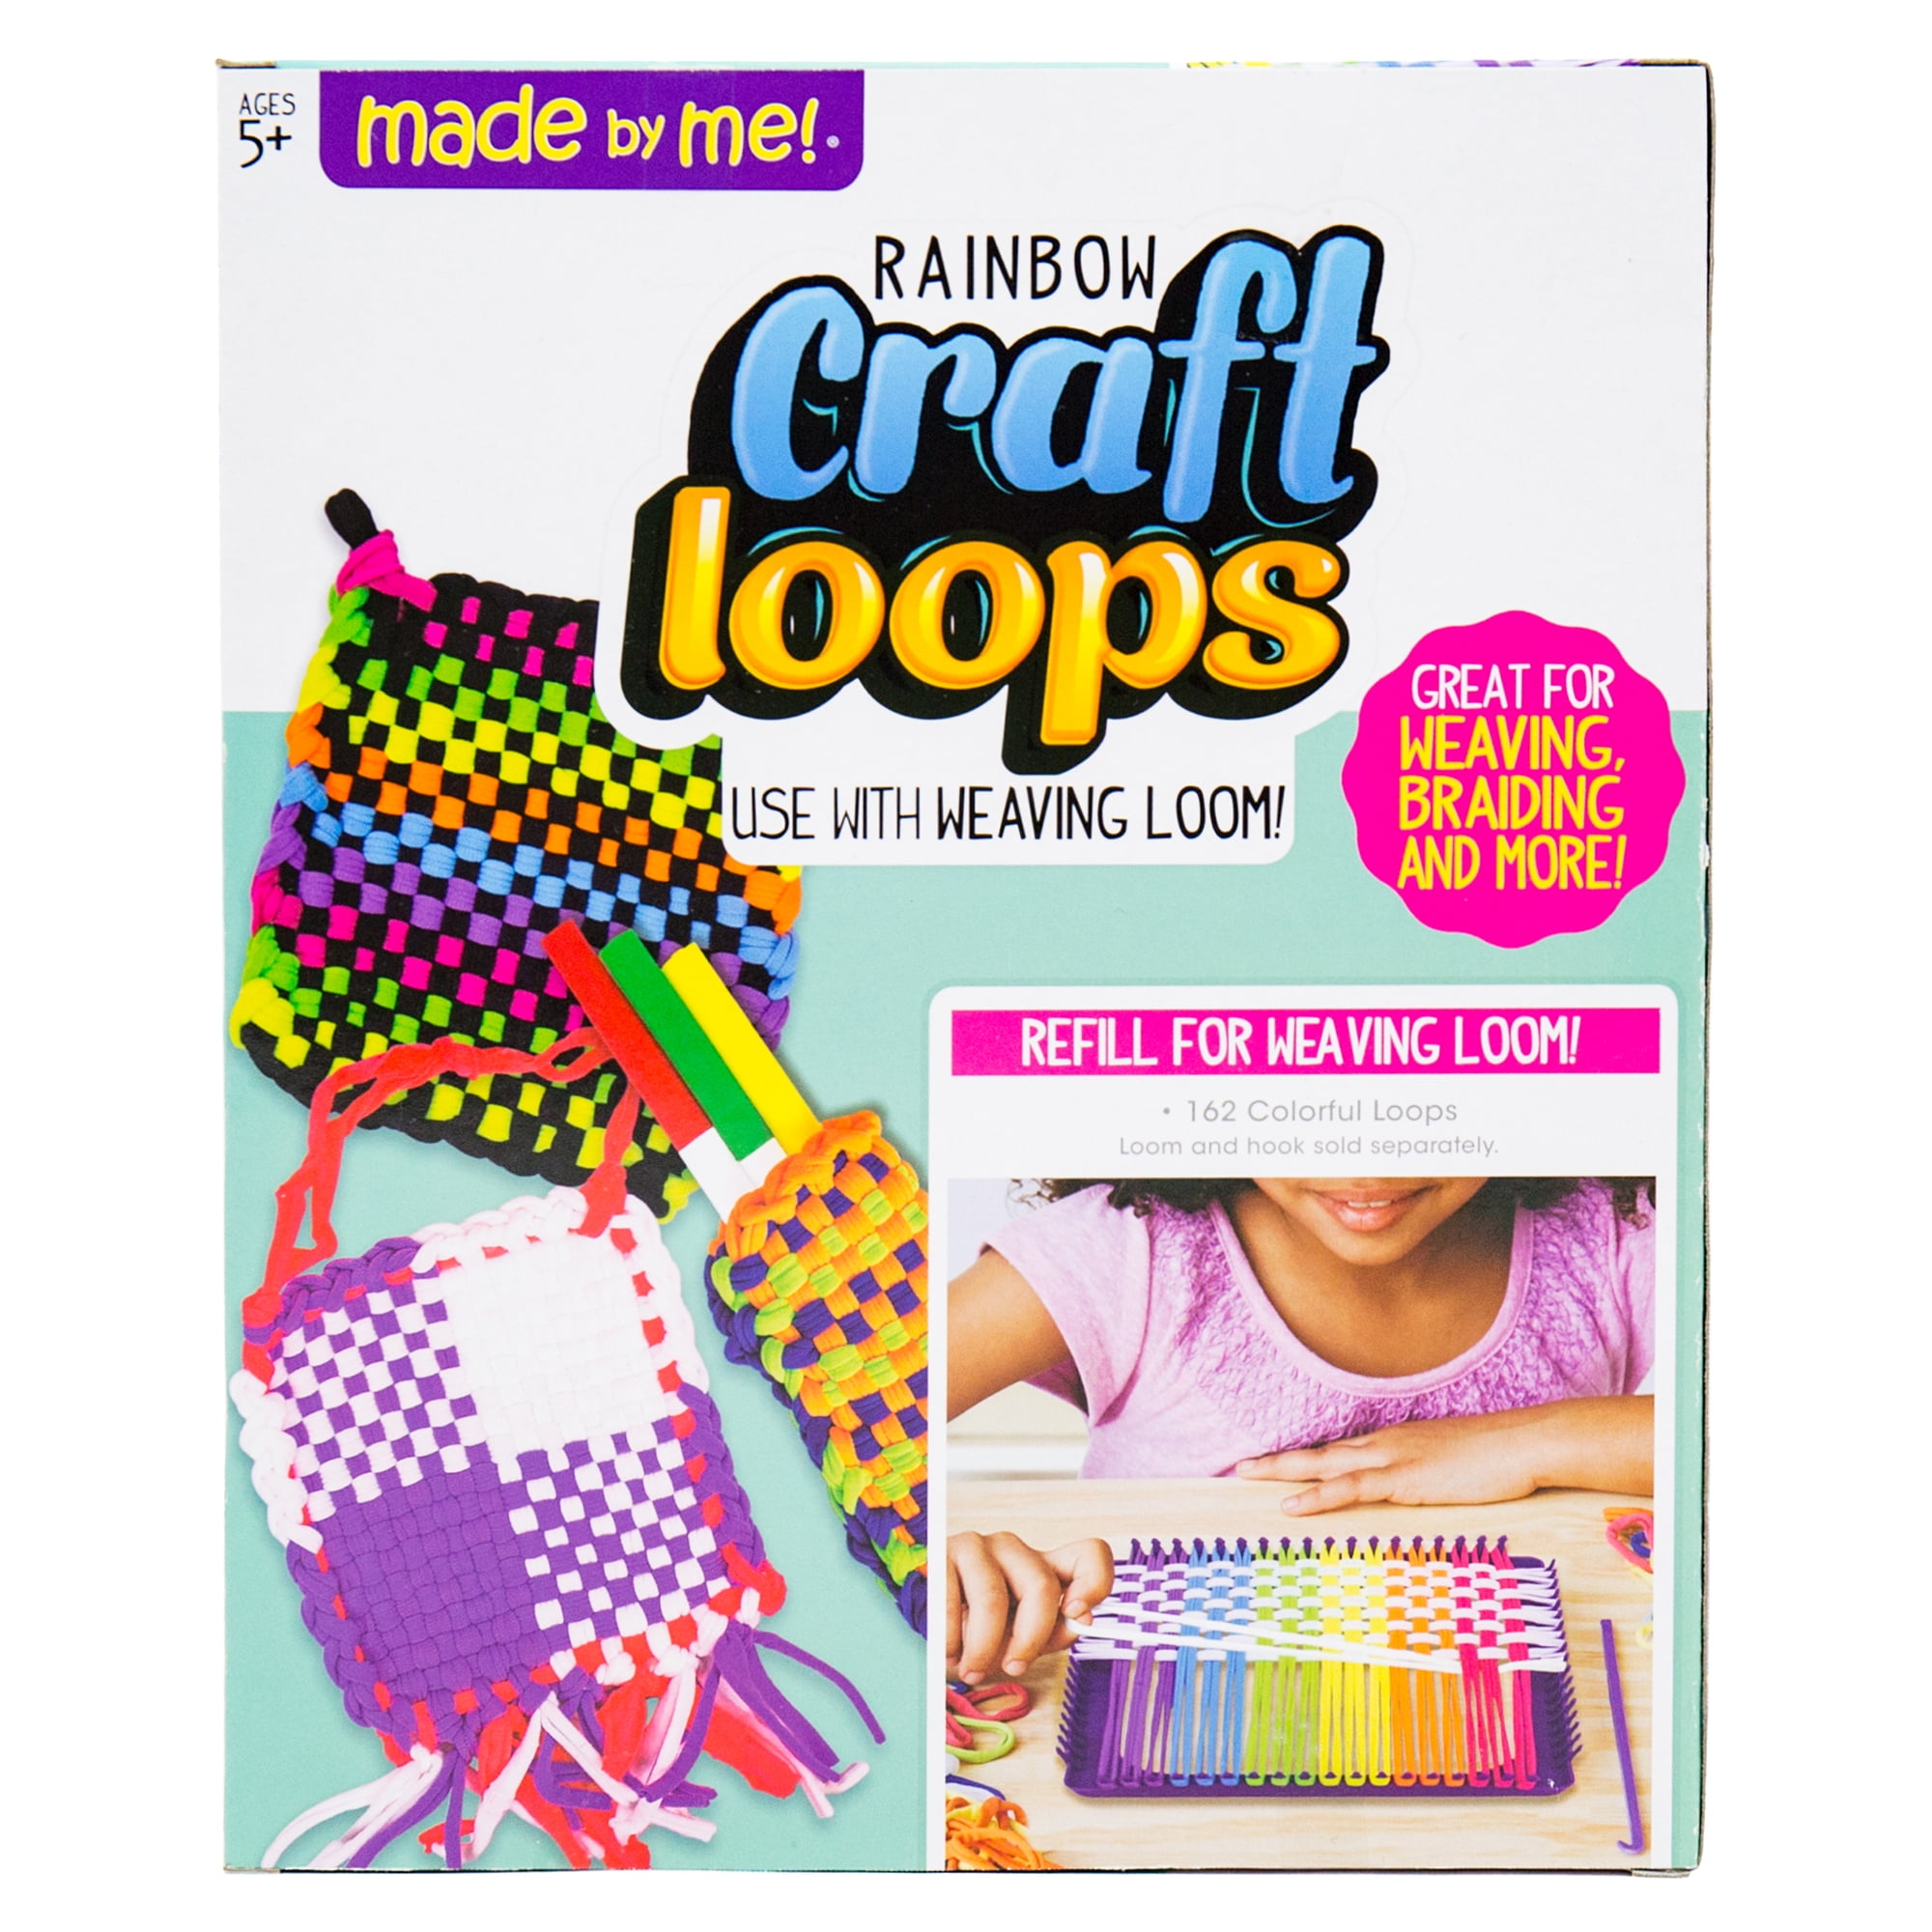 Multicolored 2020 Version Made By Me Craft Loops Refill by Horizon Group USA Includes 3.5 Oz of Weaving Loom Loops in 7 Vibrant Colors 